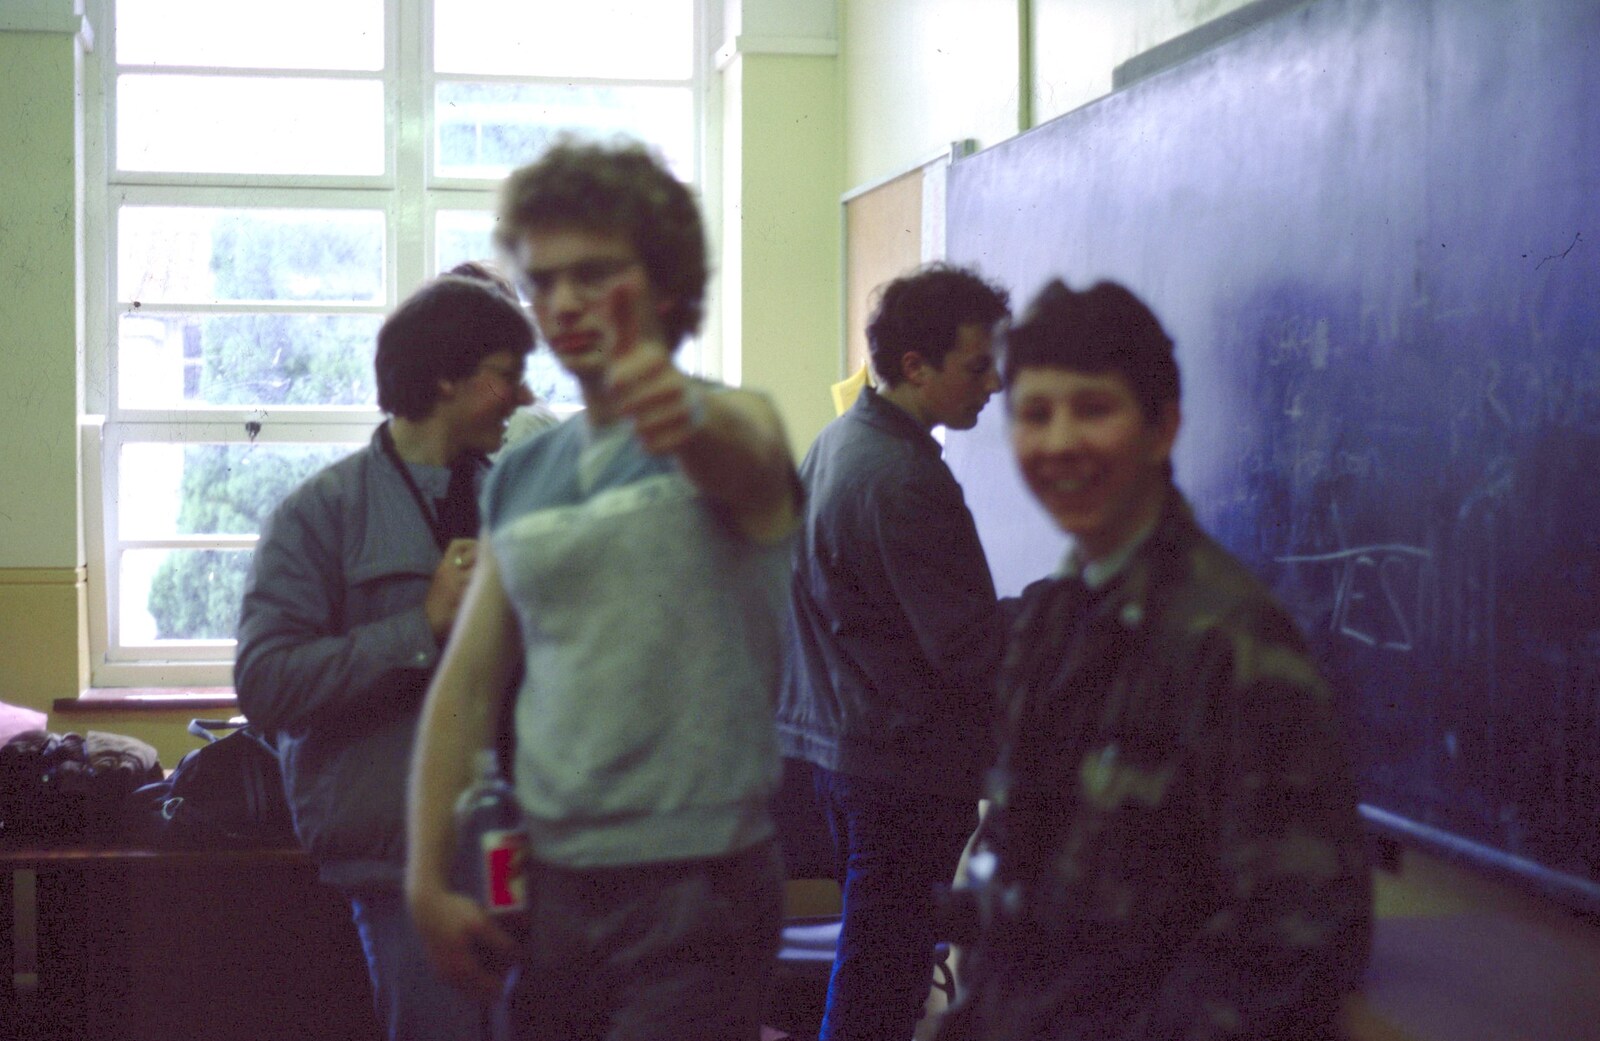 Herman gives the thumbs-up from Nosher's 18th pre-Birthday and College Miscellany, Sway and Brockenhurst - 22nd May 1985